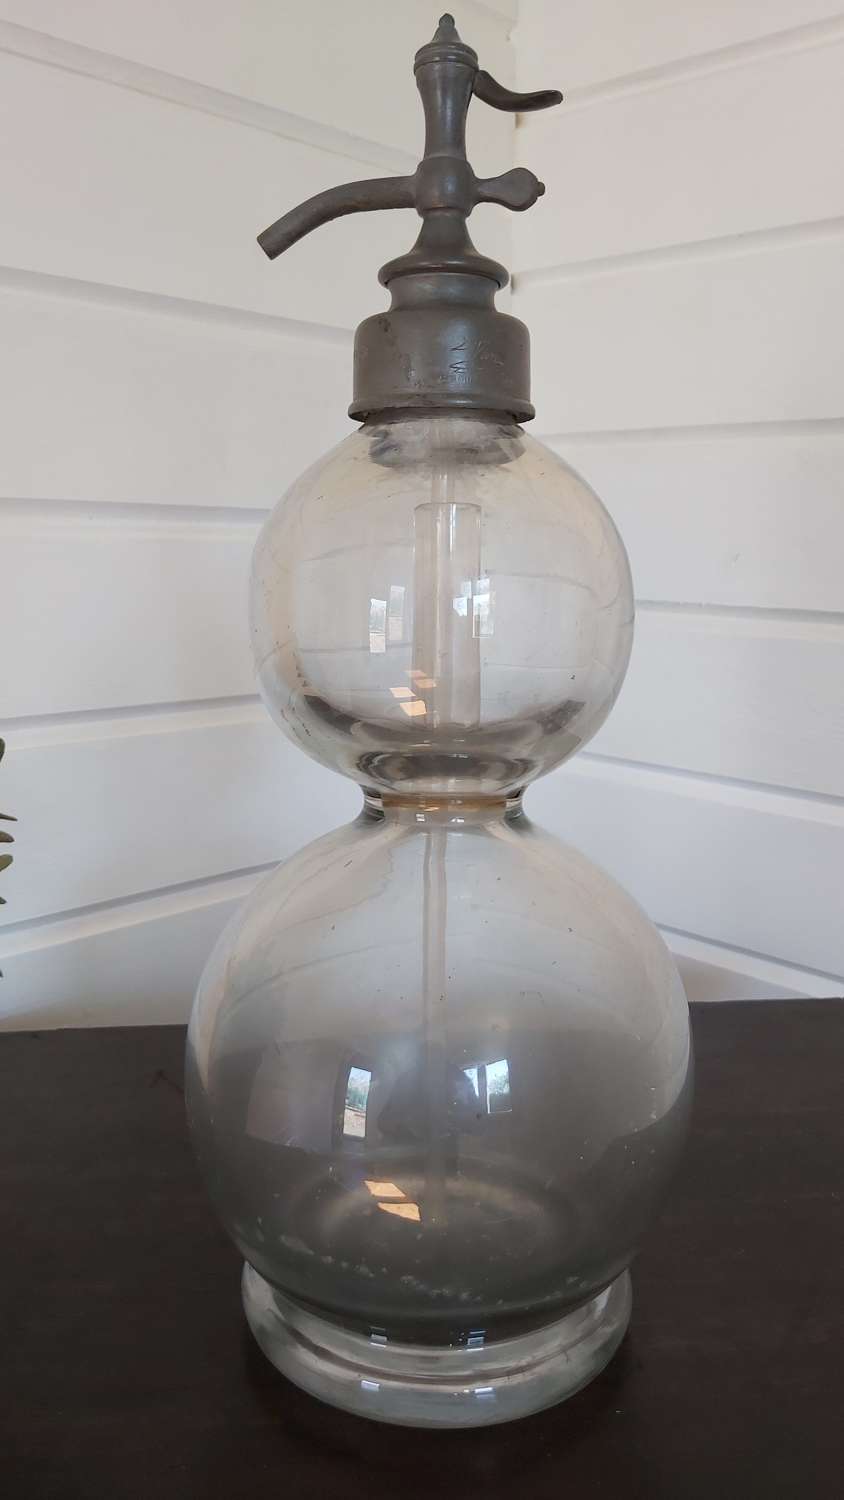 Antique French double ball soda syphon